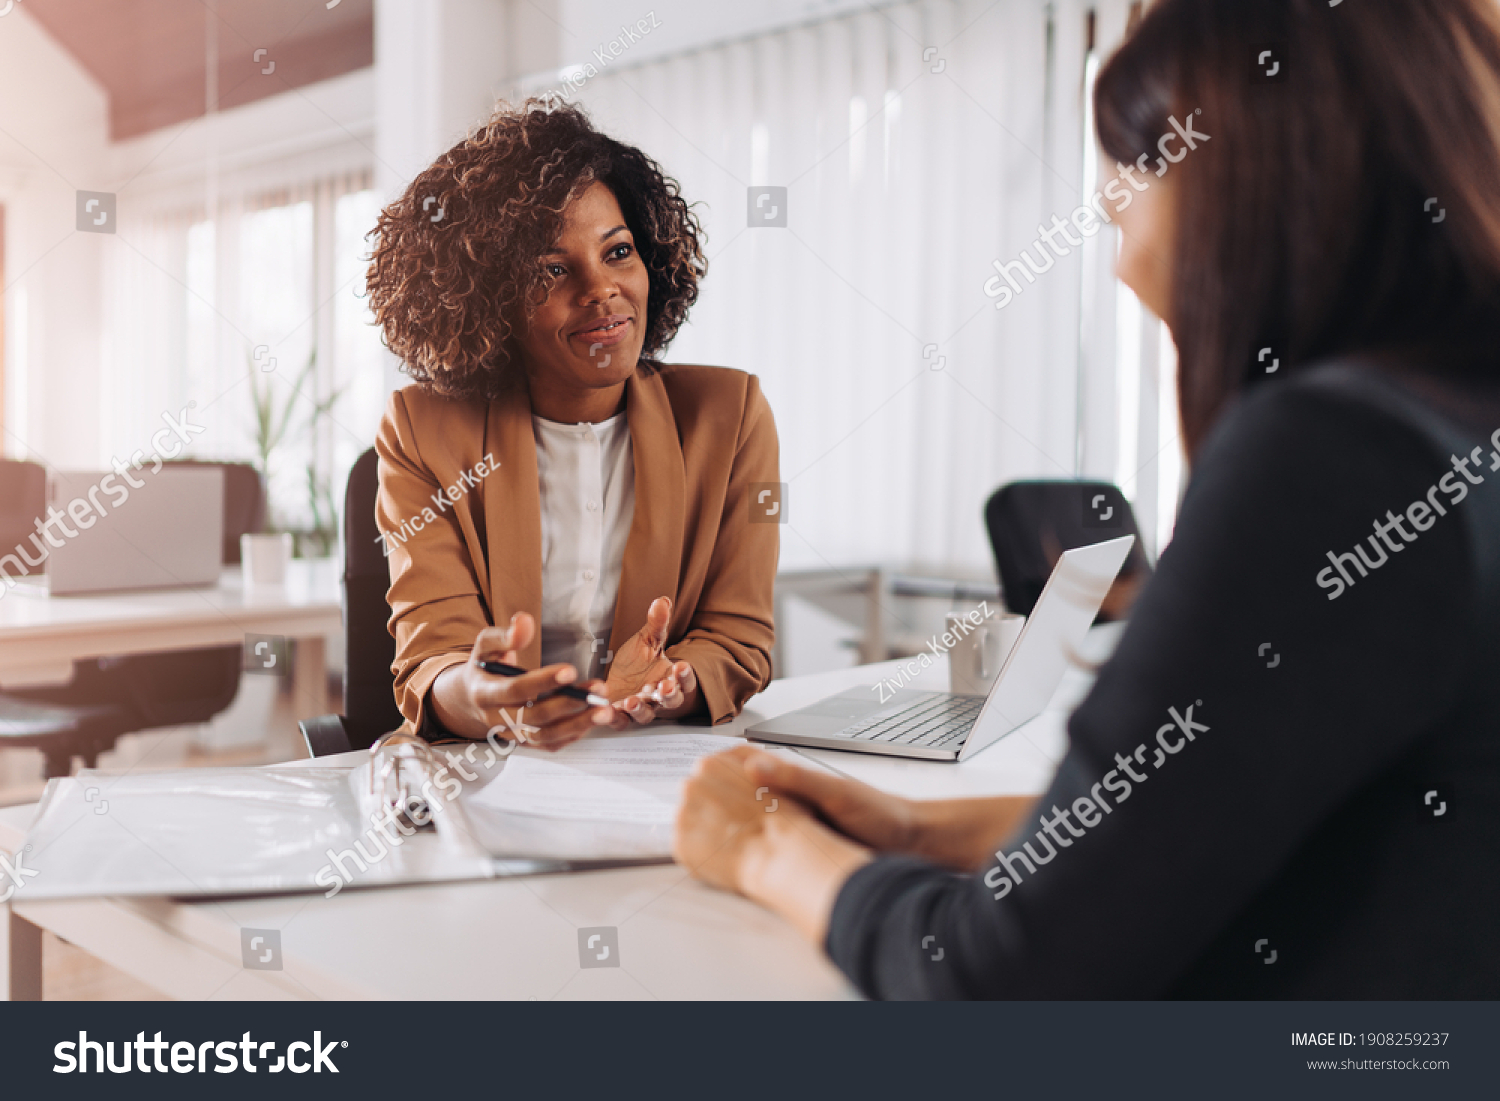 Young woman doing a job interview #1908259237